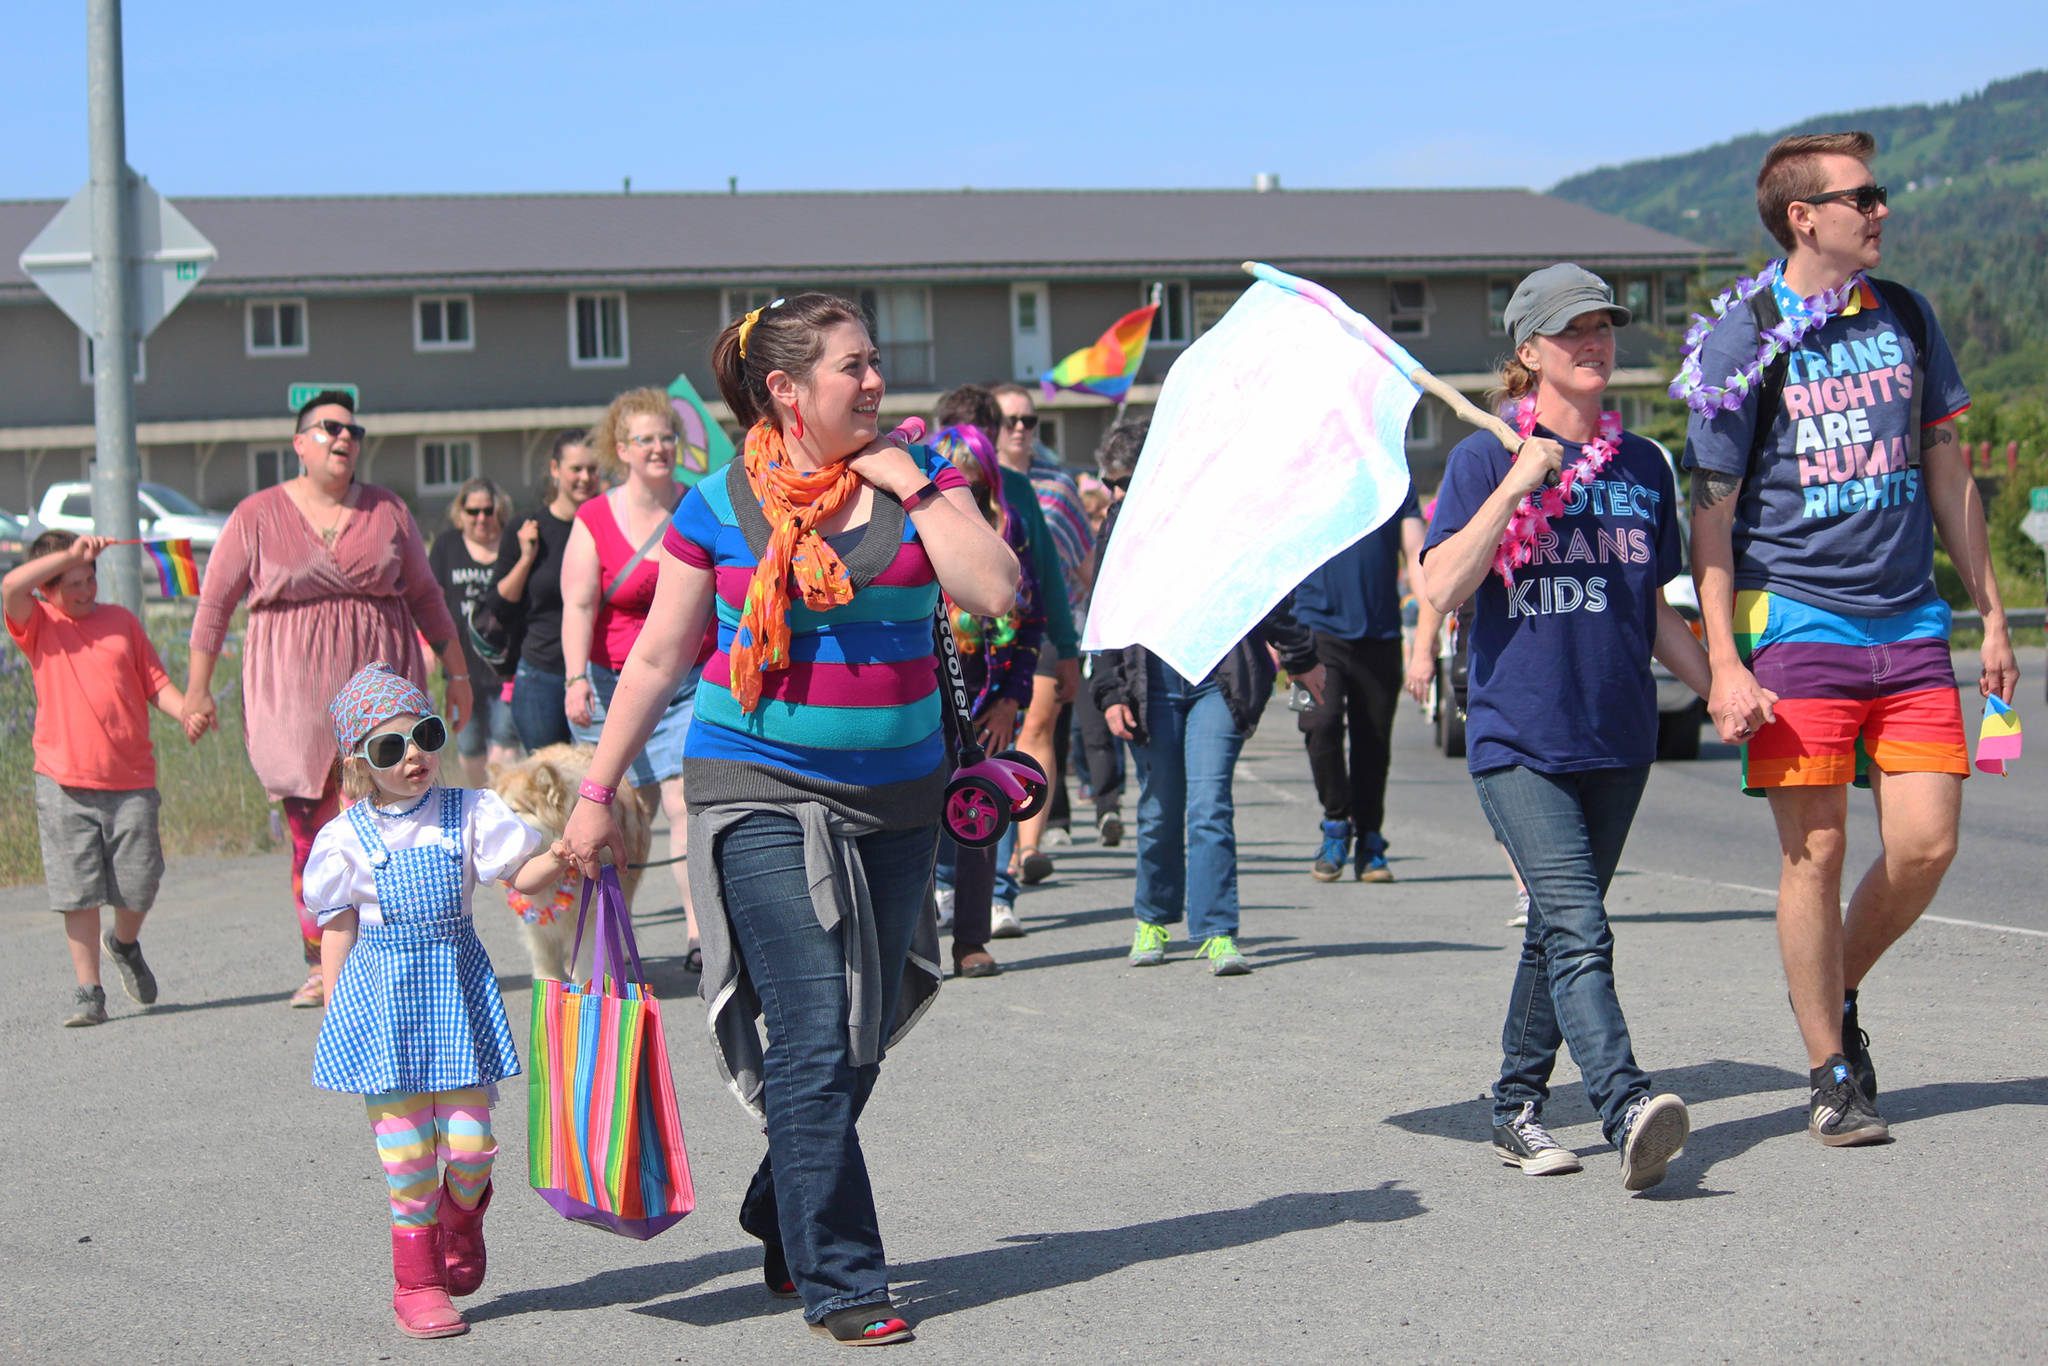 Participant’s in Homer’s second Pride Walk make their way up Ocean Drive on Saturday, June 22, 2019 in Homer, Alaska. (Photo by Megan Pacer/Homer News)